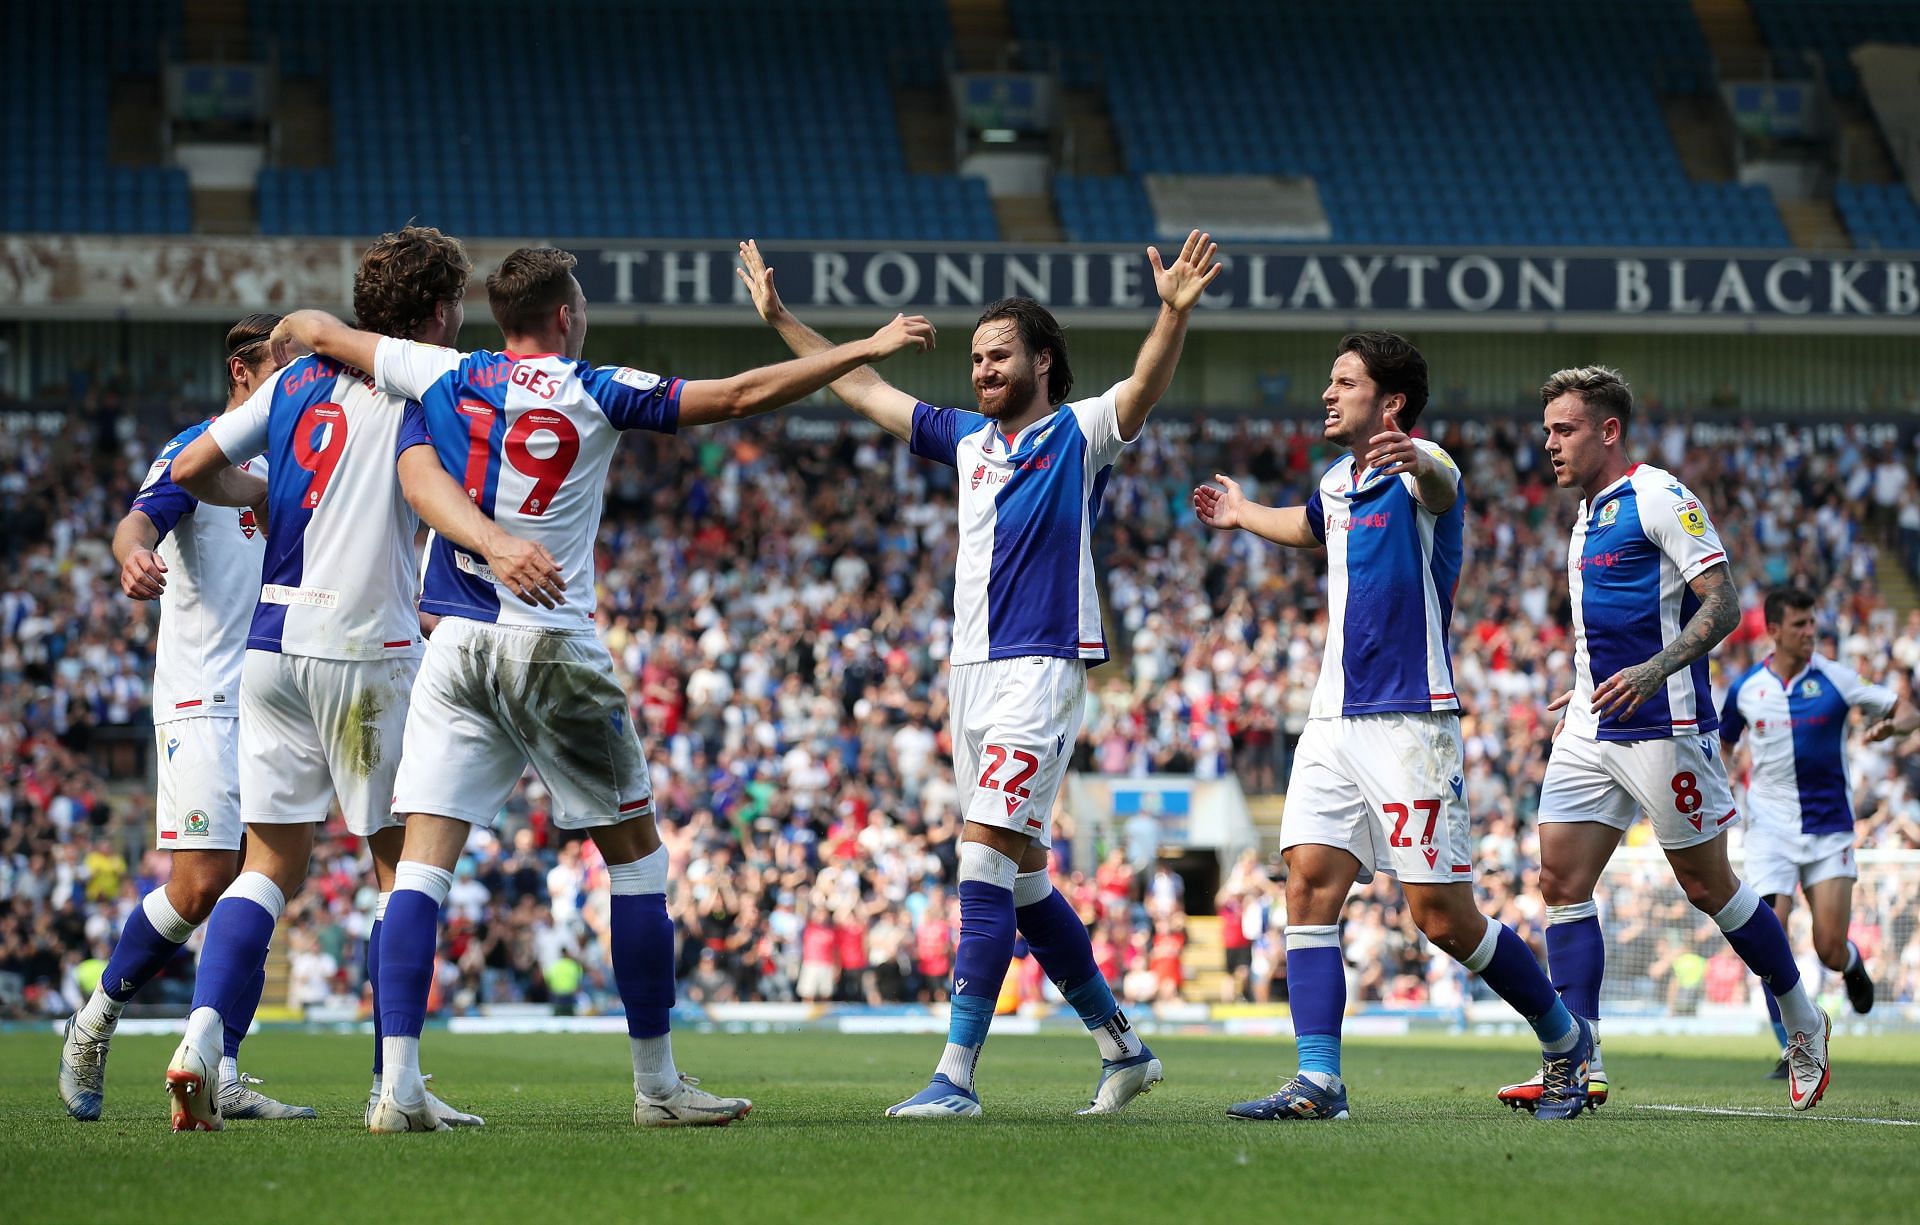 Blackburn will be looking to consolidate their lead at the top of the table